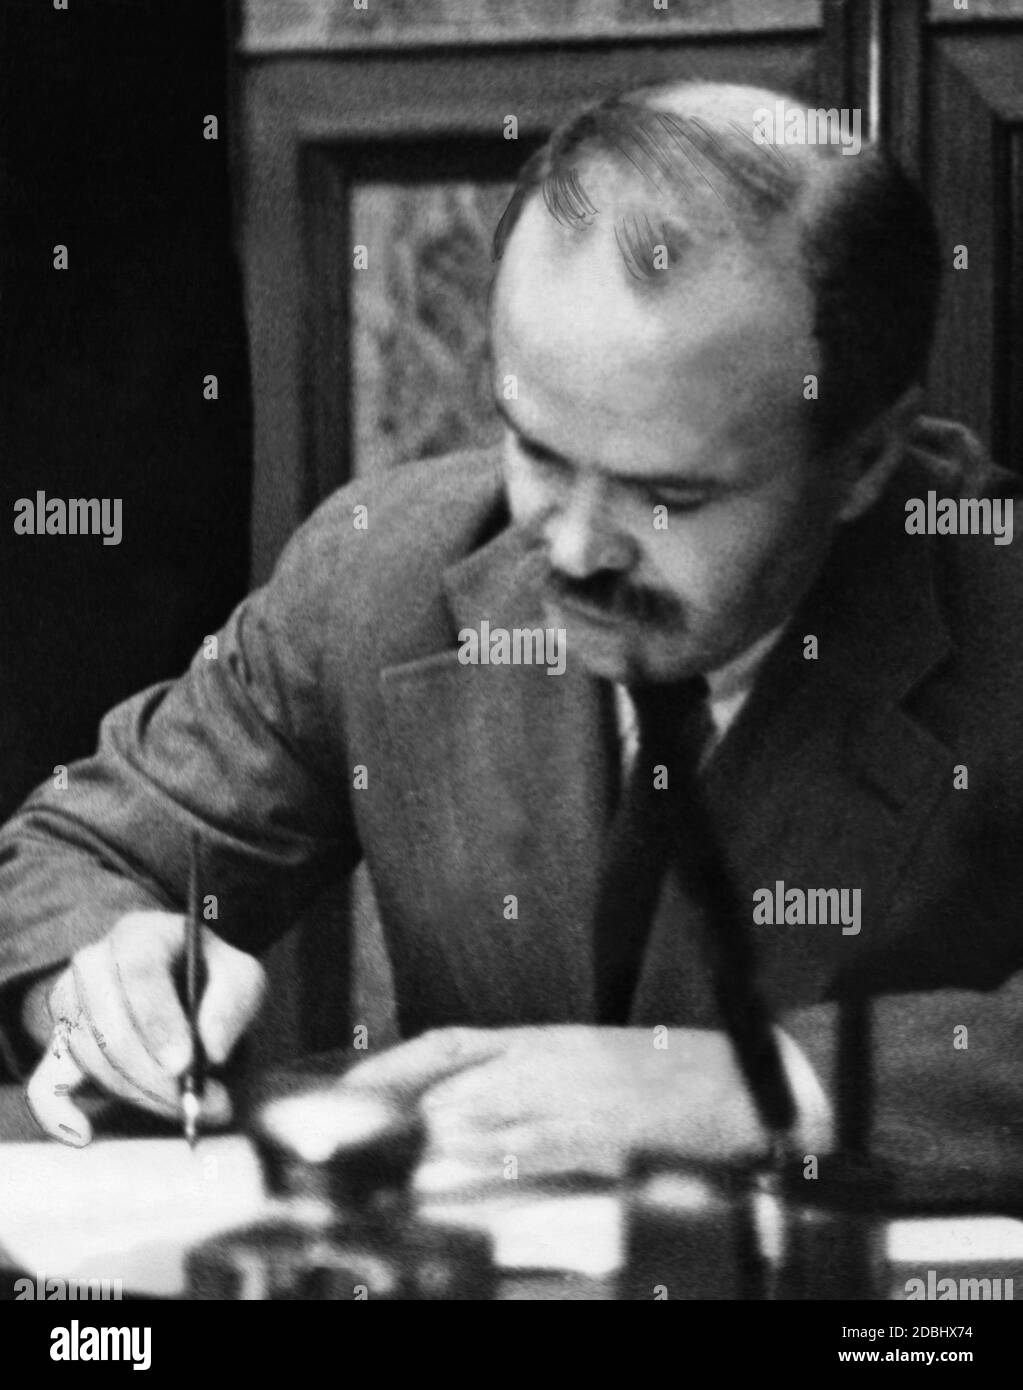 Vyacheslav Molotov at the signing of the German-Soviet non-aggression pact in the Kremlin. Stock Photo